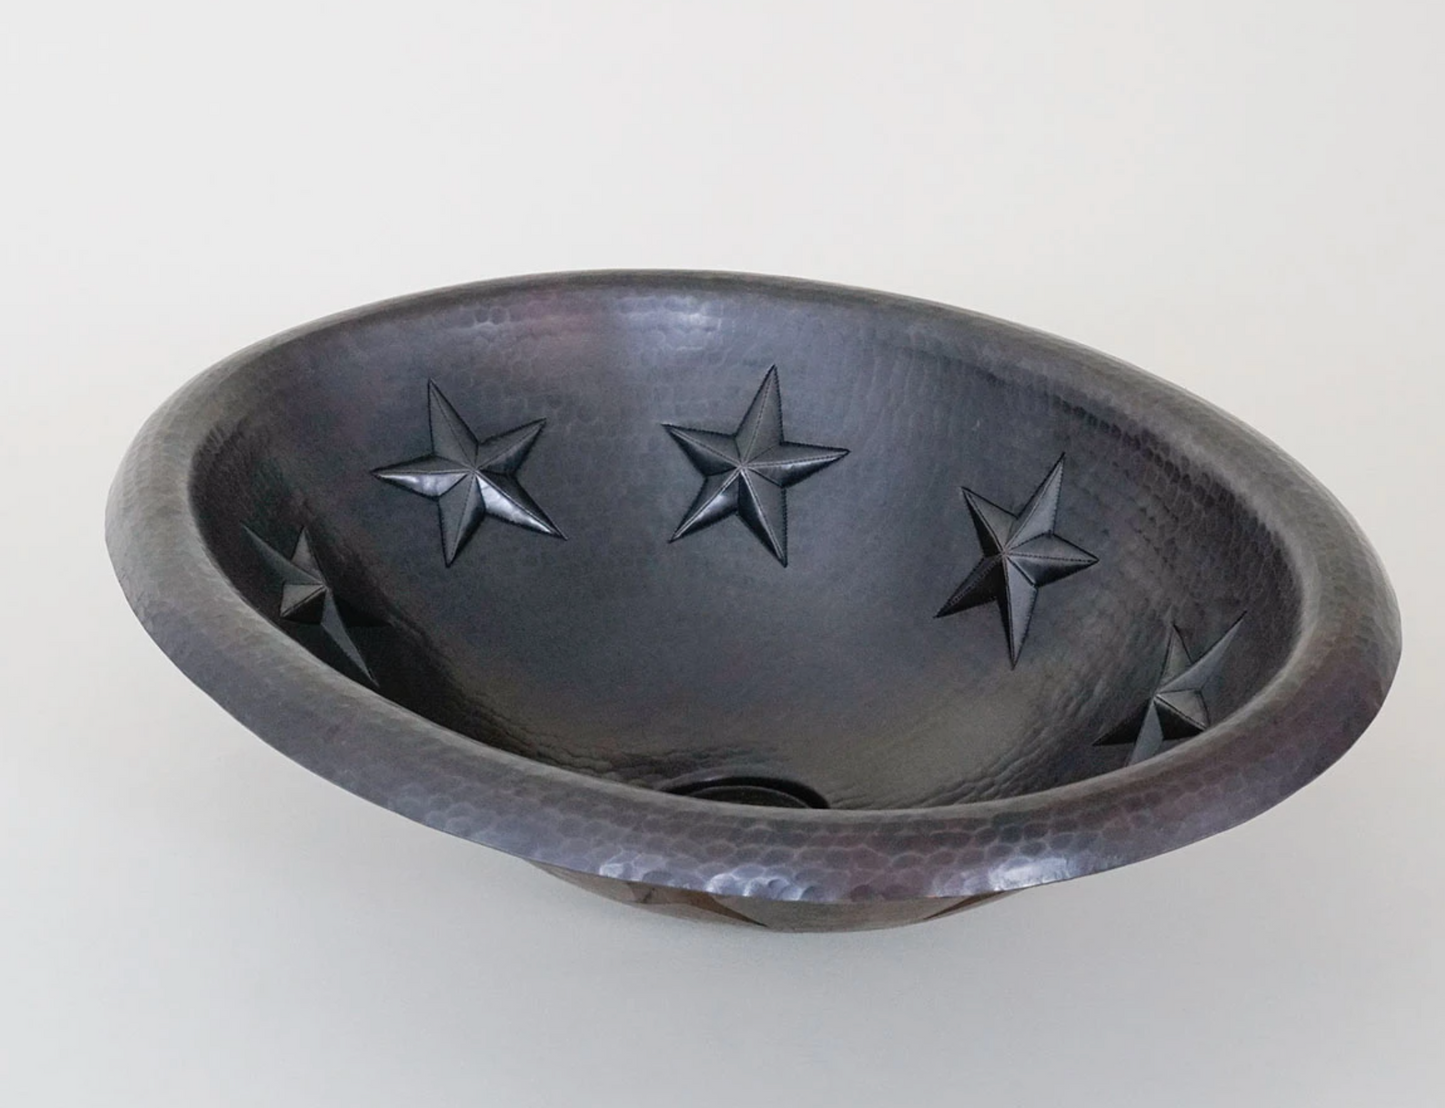 Oval Copper Sink with Stars Design